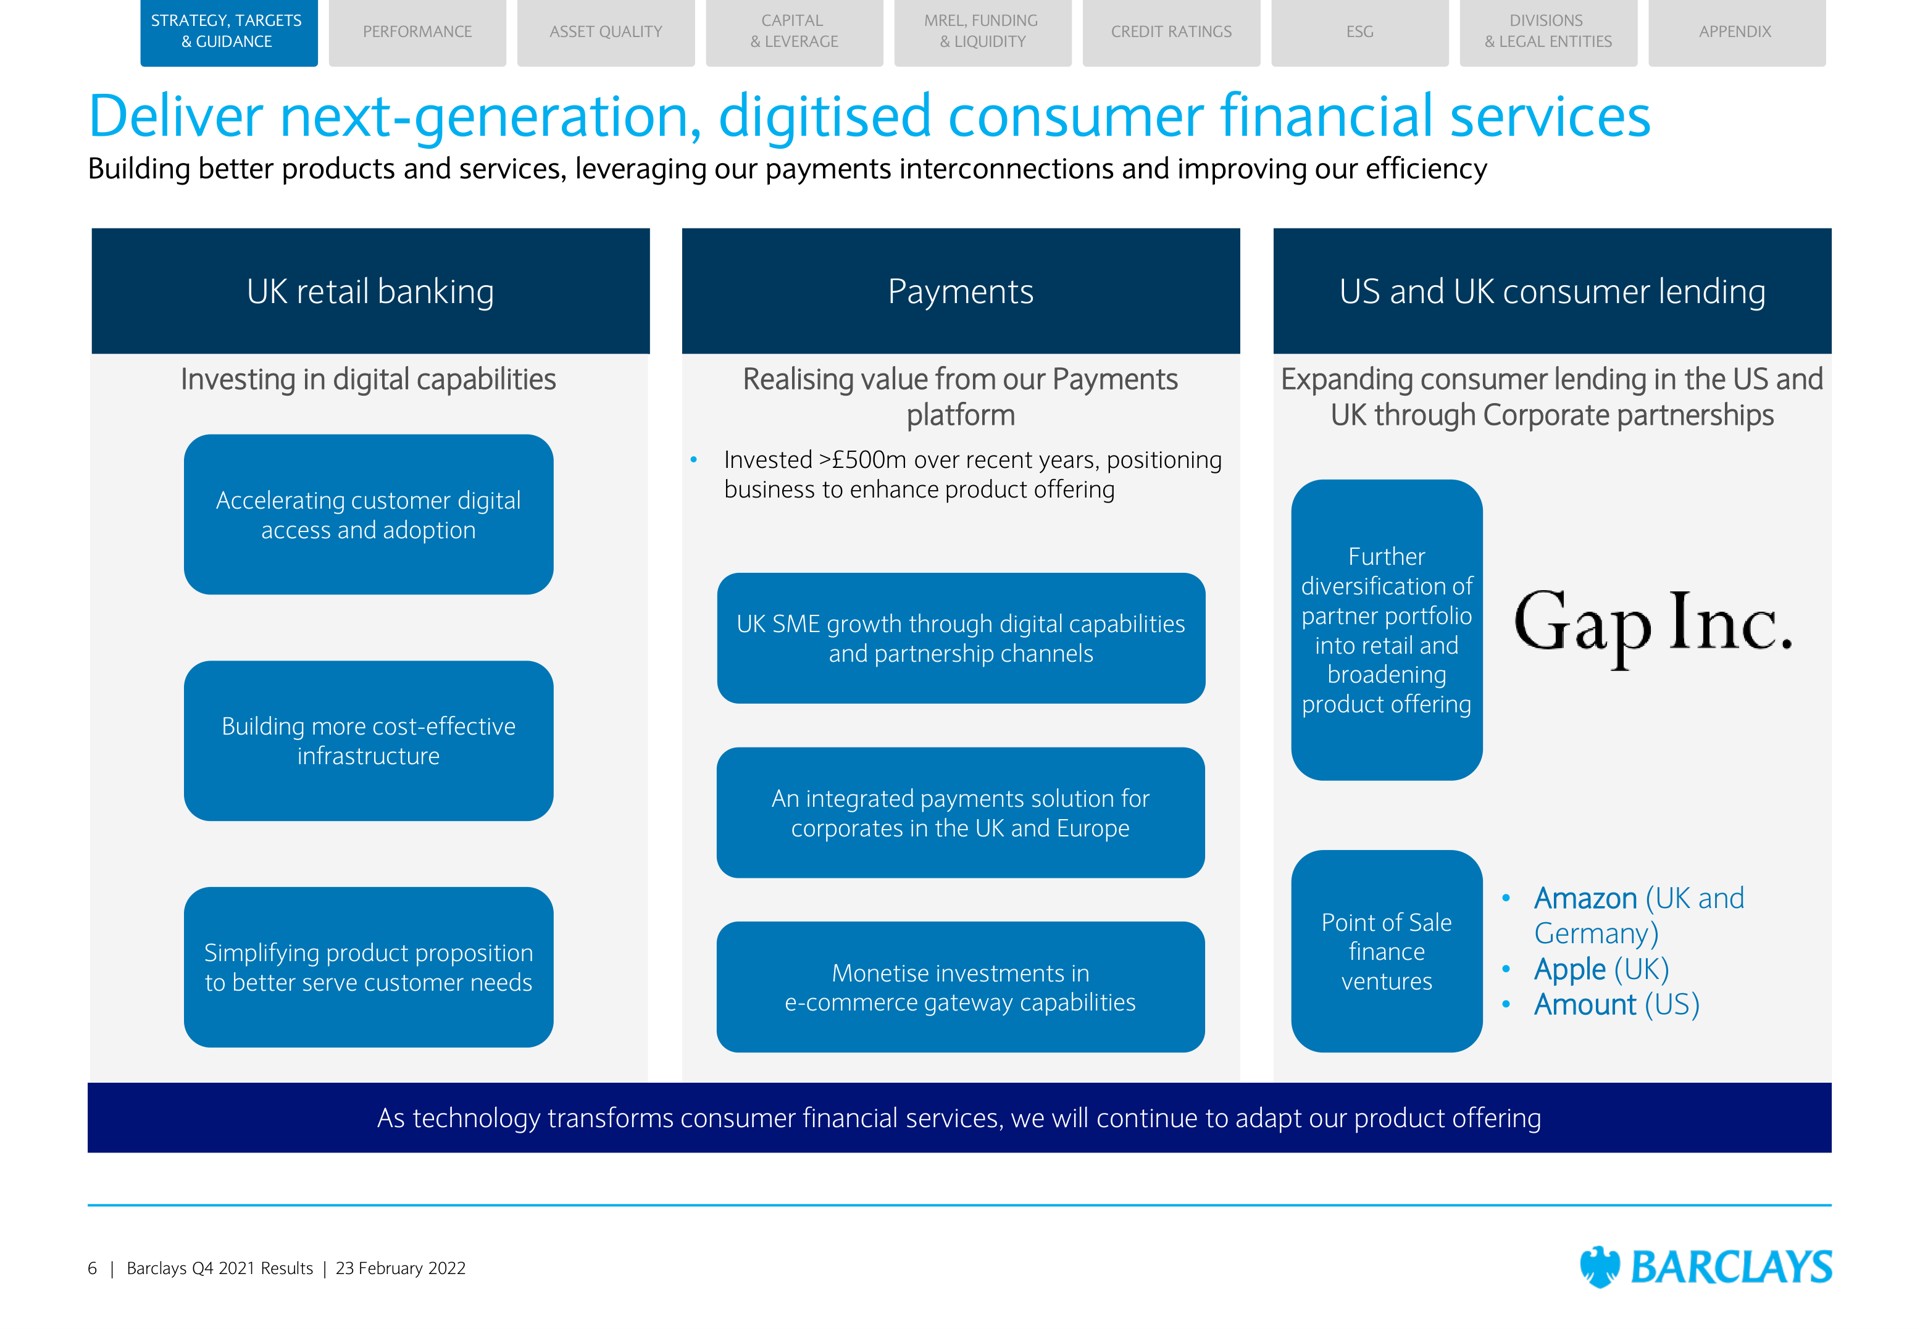 deliver next generation consumer financial services building better products and services leveraging our payments interconnections and improving our efficiency retail banking payments us and consumer lending investing in digital capabilities value from our payments platform expanding consumer lending in the us and through corporate partnerships and apple amount us as technology transforms consumer financial services we will continue to adapt our product offering | Barclays